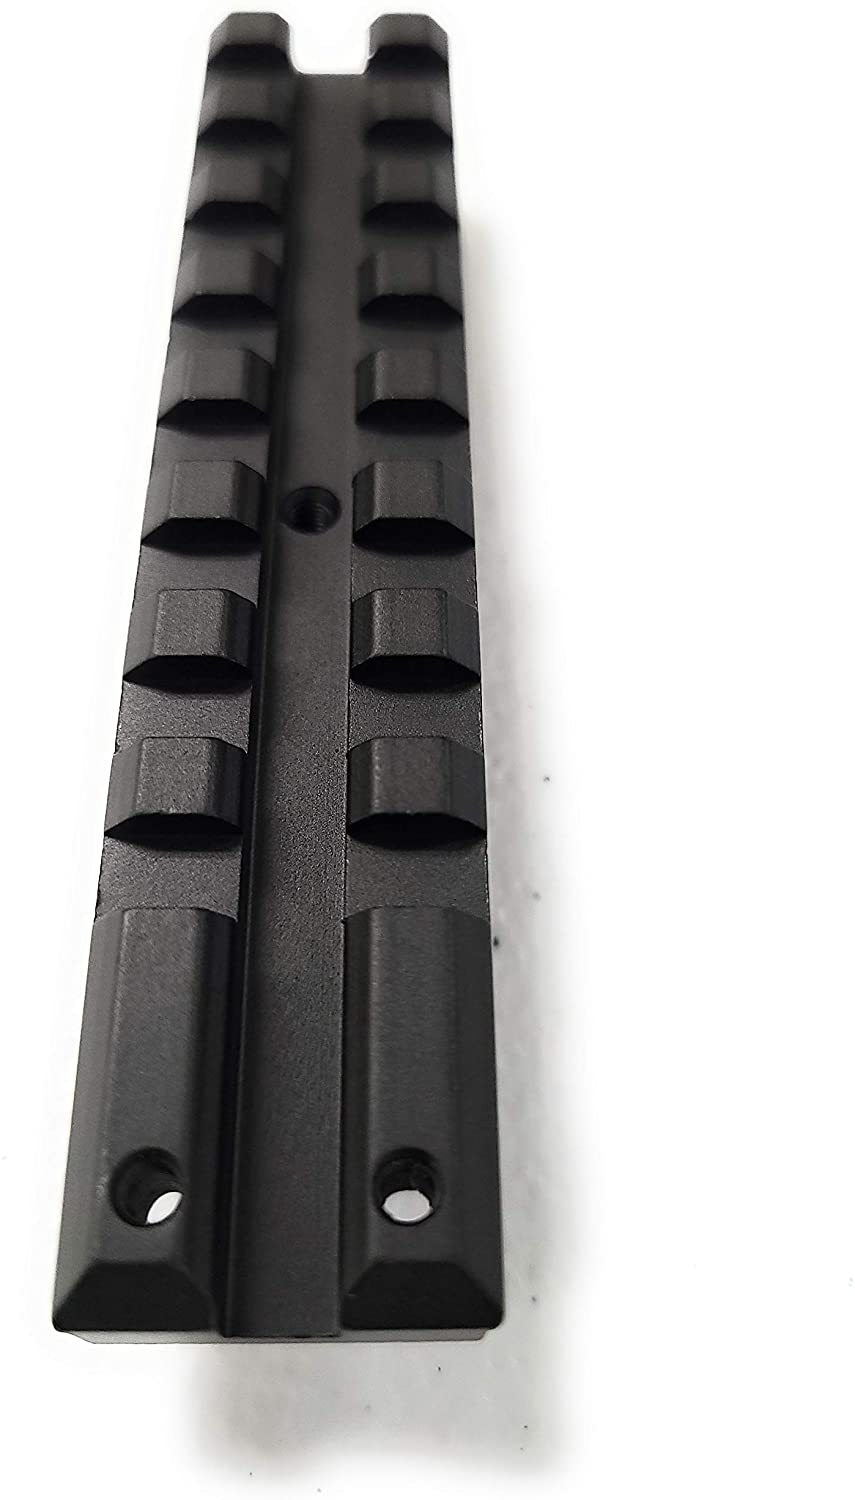 AK47 Rear Sight Rail Insert Rail to Mount for installing Low Profile Red Dot Optics / Scopes Sights Green Blob Outdoors 